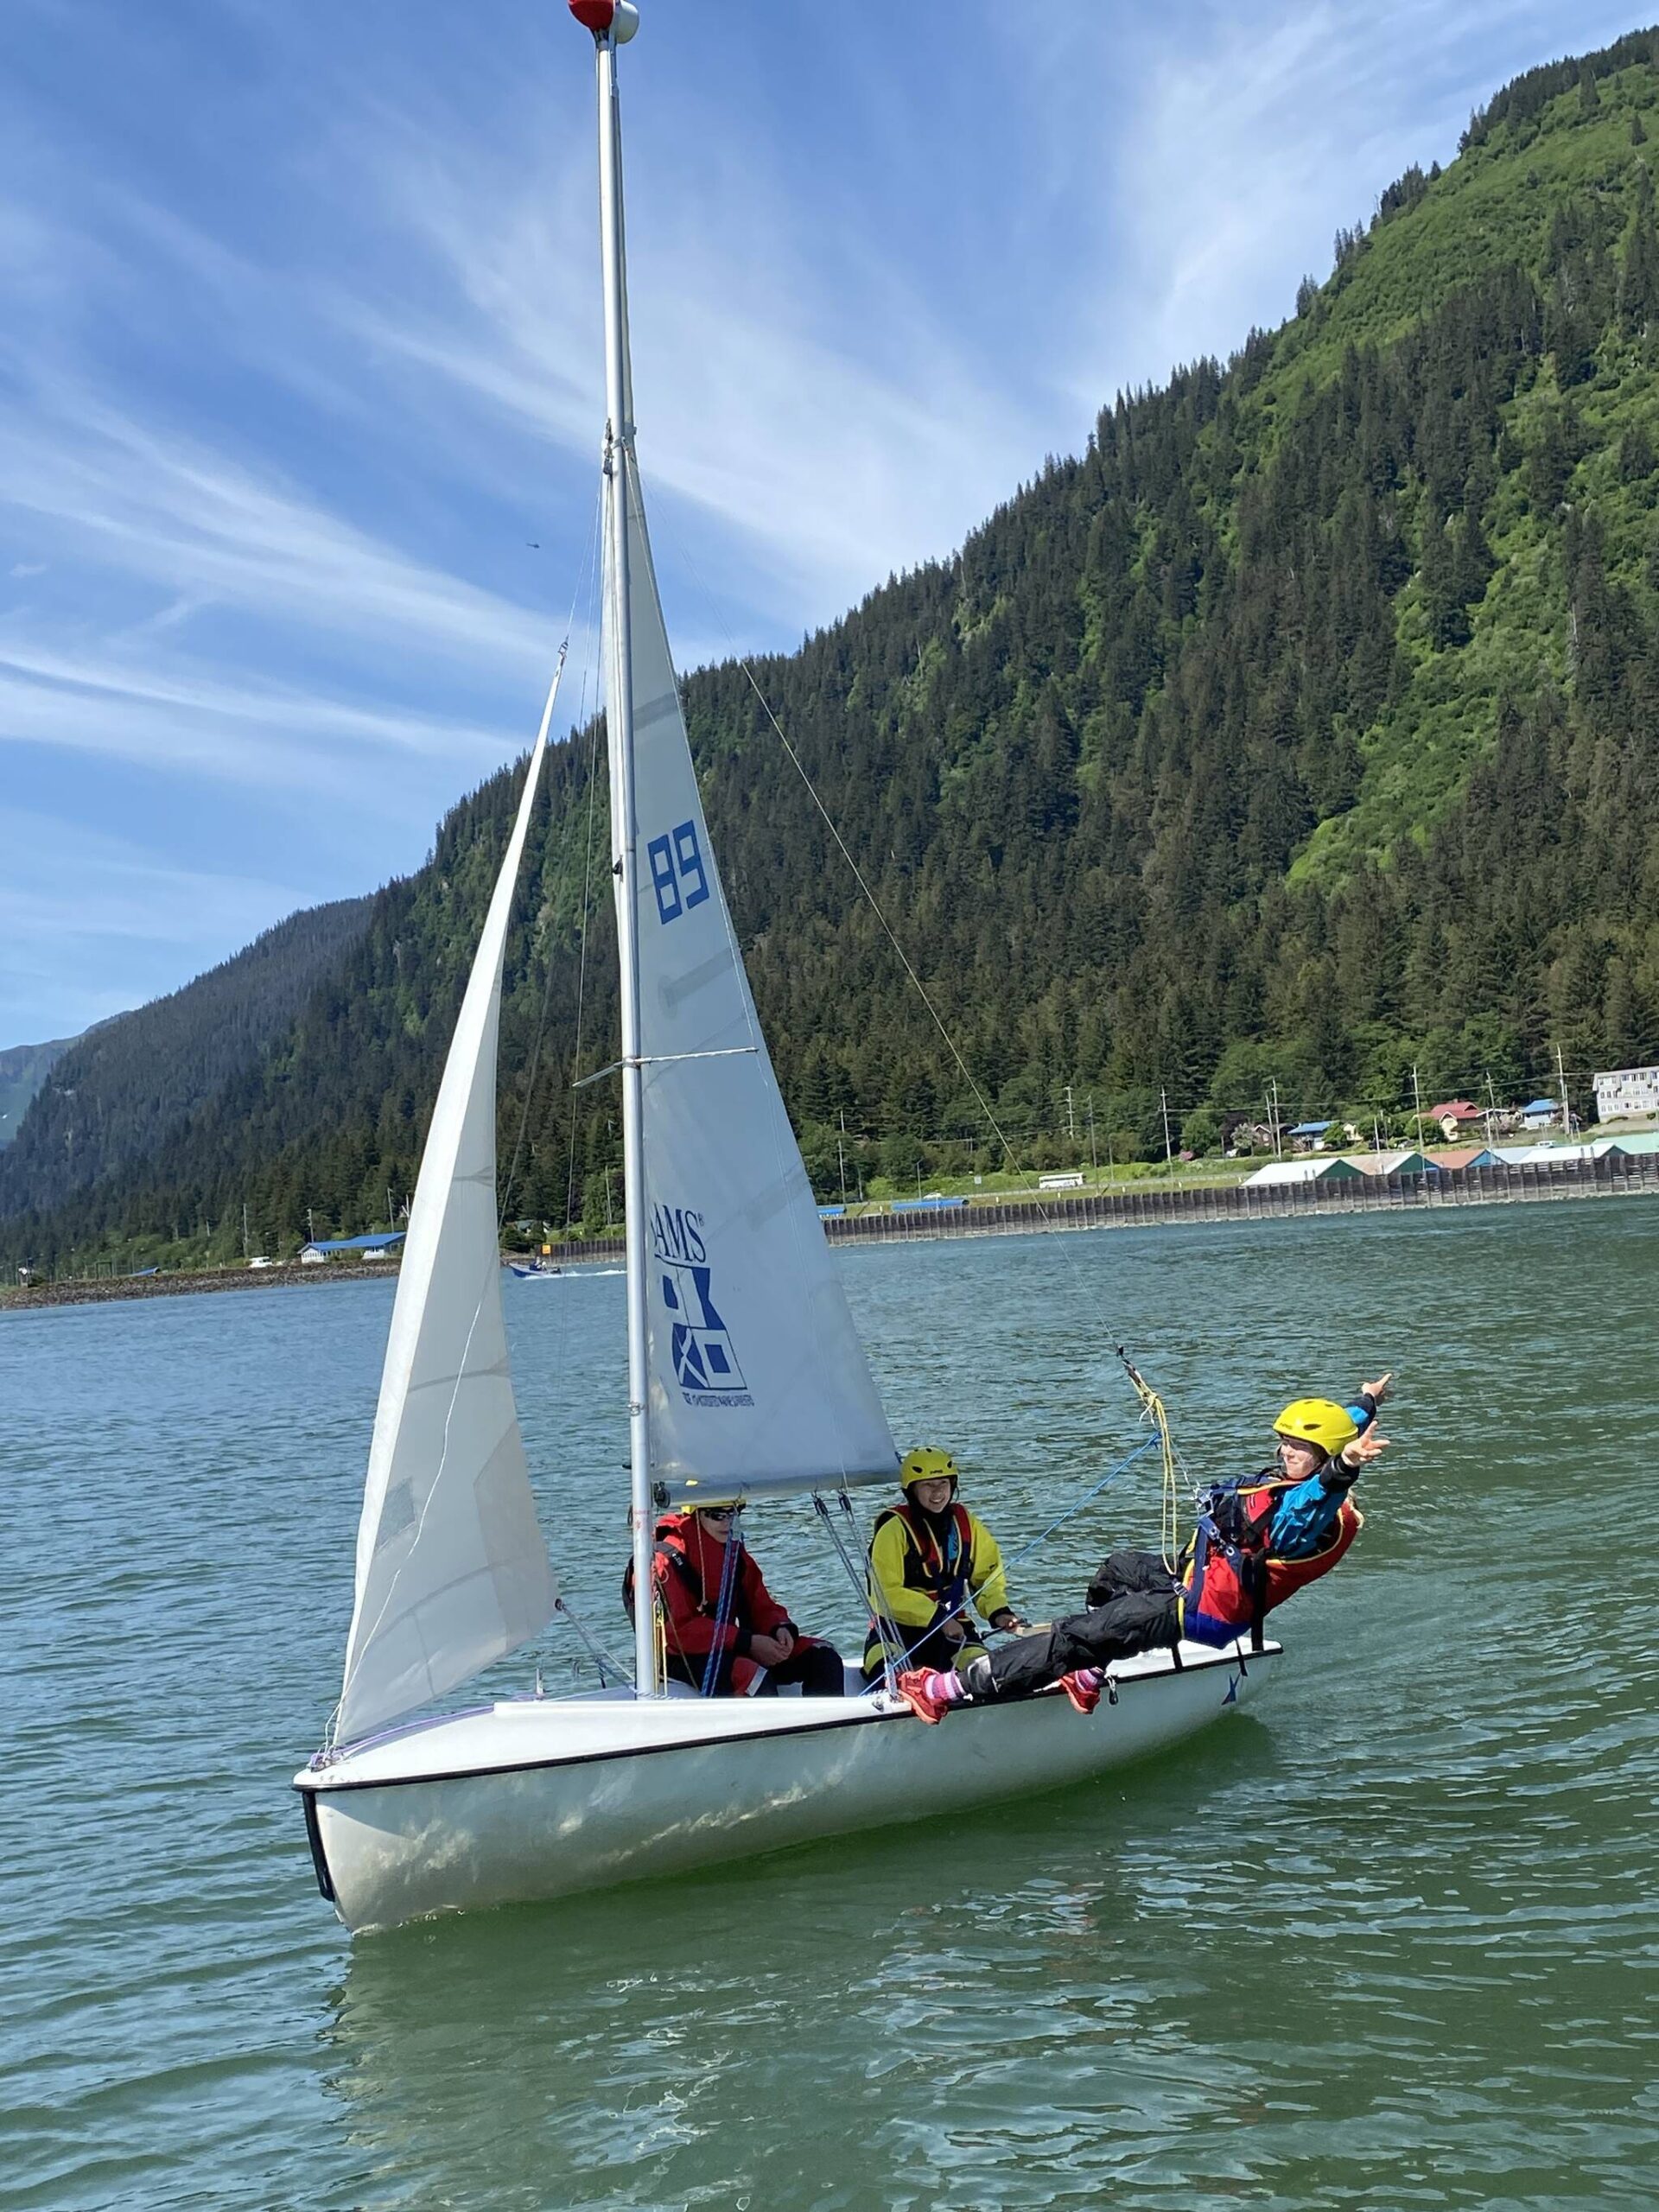 Jack Adams, 15, Lua Mangaccat, 15, and Sigrid Eller, 13, enjoy calm waters in Gastineau Channel during a Juneau Youth Sailing course this week. (Photo by Adrian Whitney)